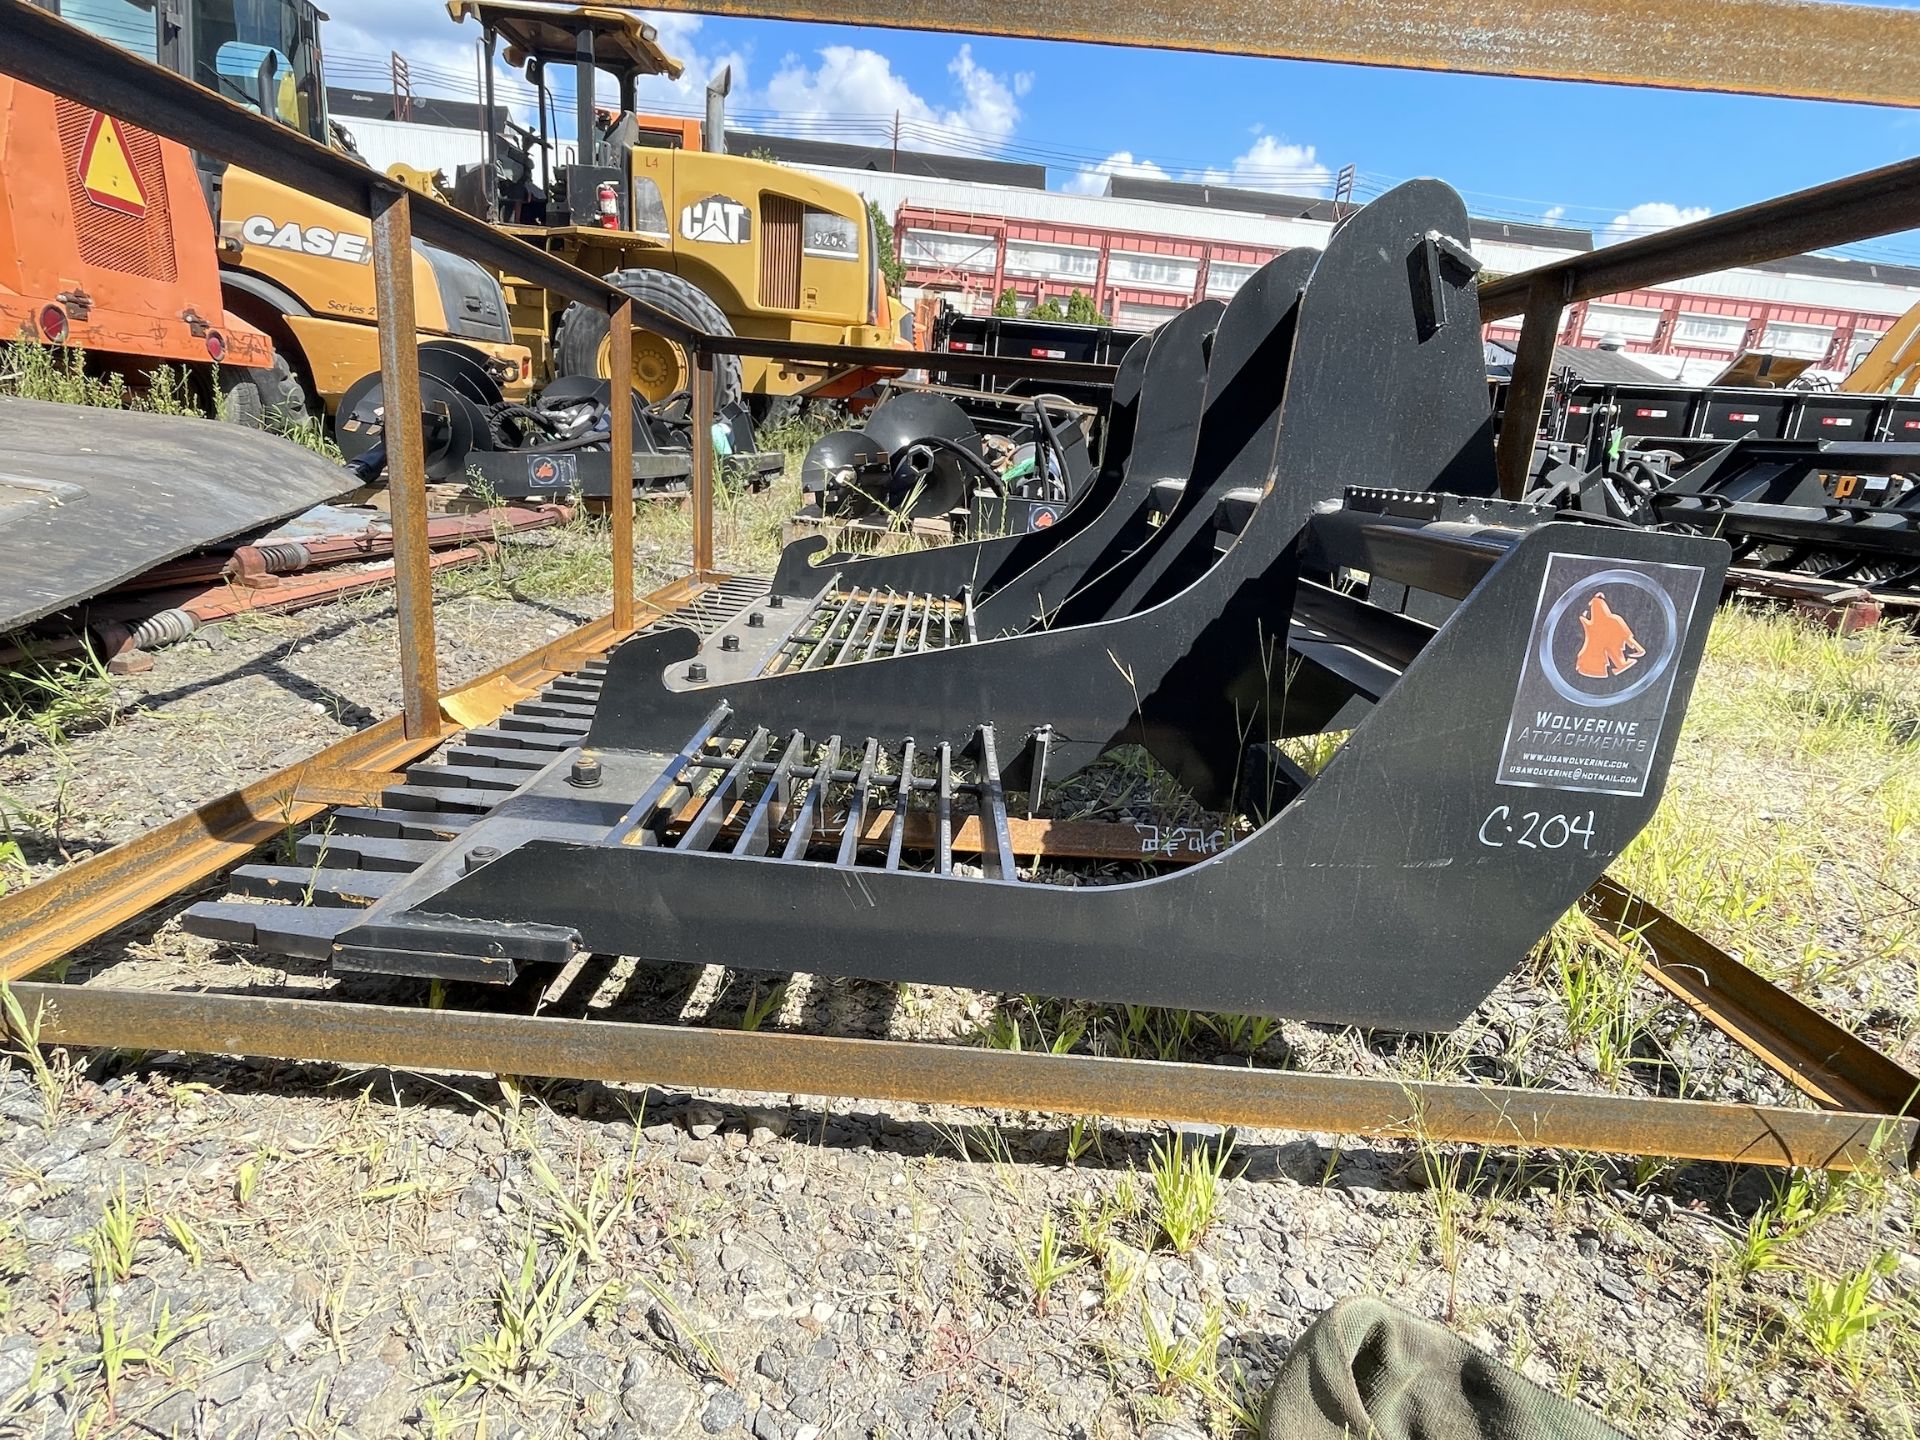 New Wolverine Skid Steer Power Rack Attachment (C204) - Image 2 of 6